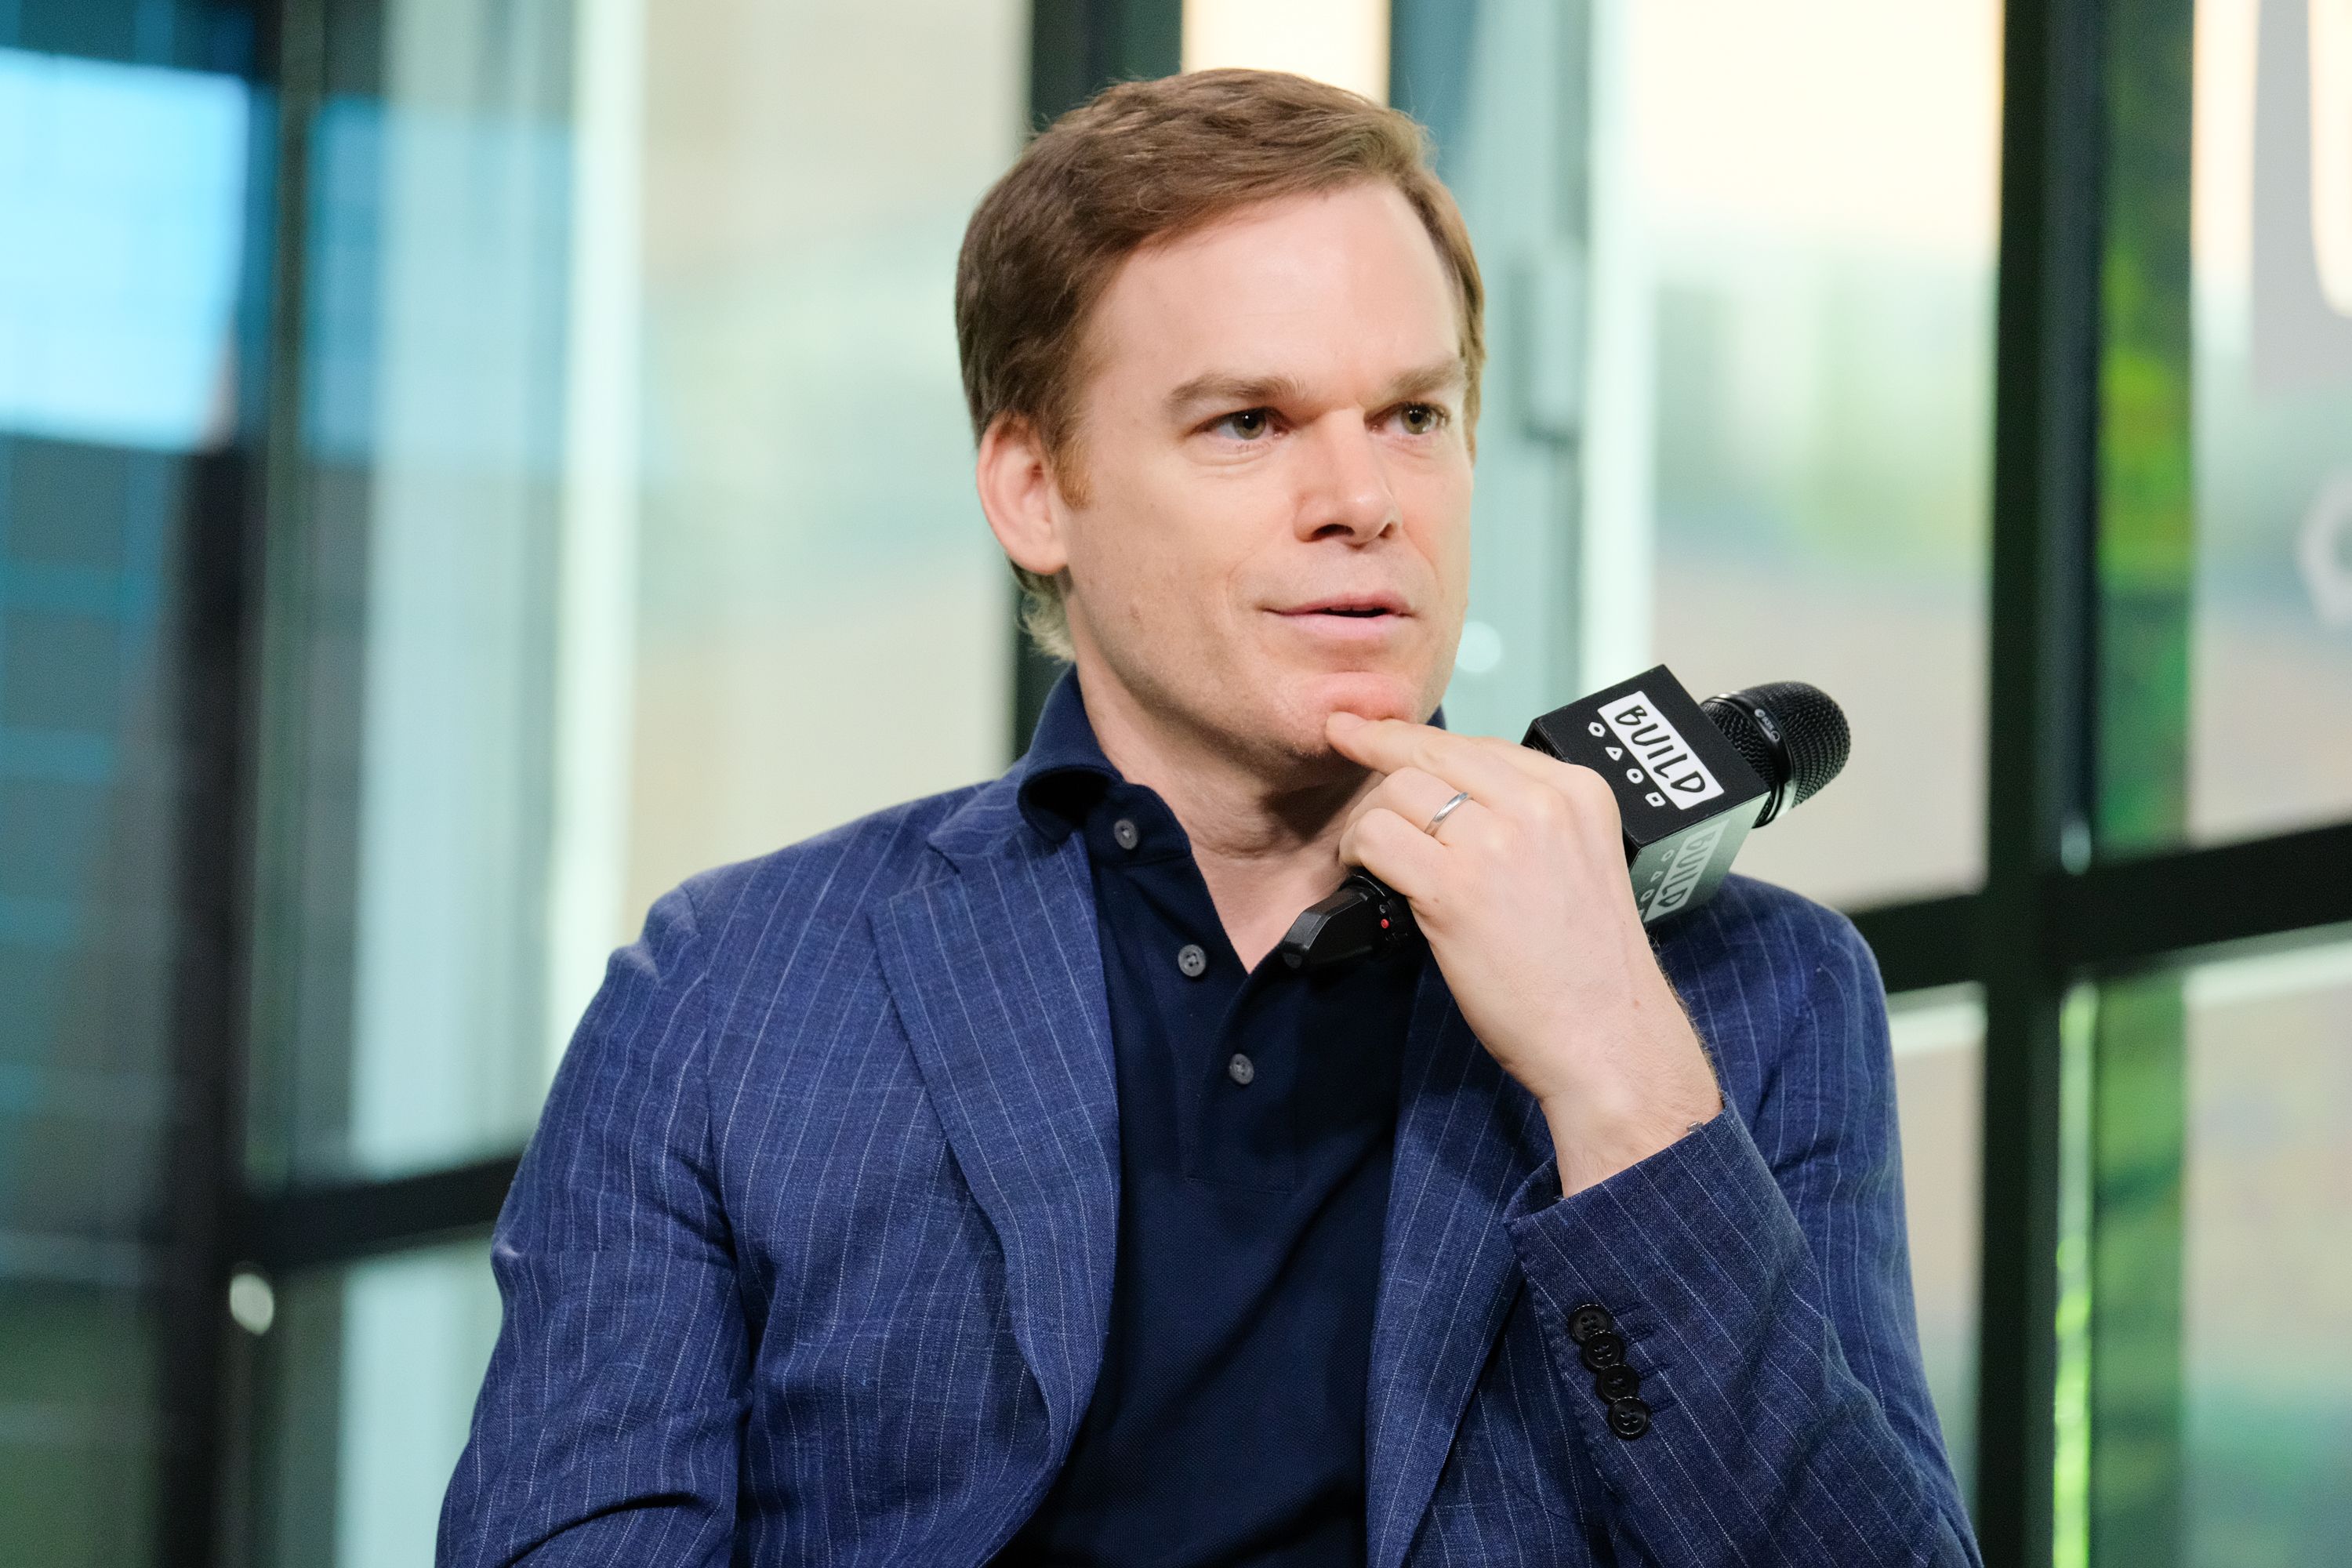  Michael C. Hall visits "BUILD" to discuss his new Netflix series "Safe" in 2018 in New York City | Source: Getty Images